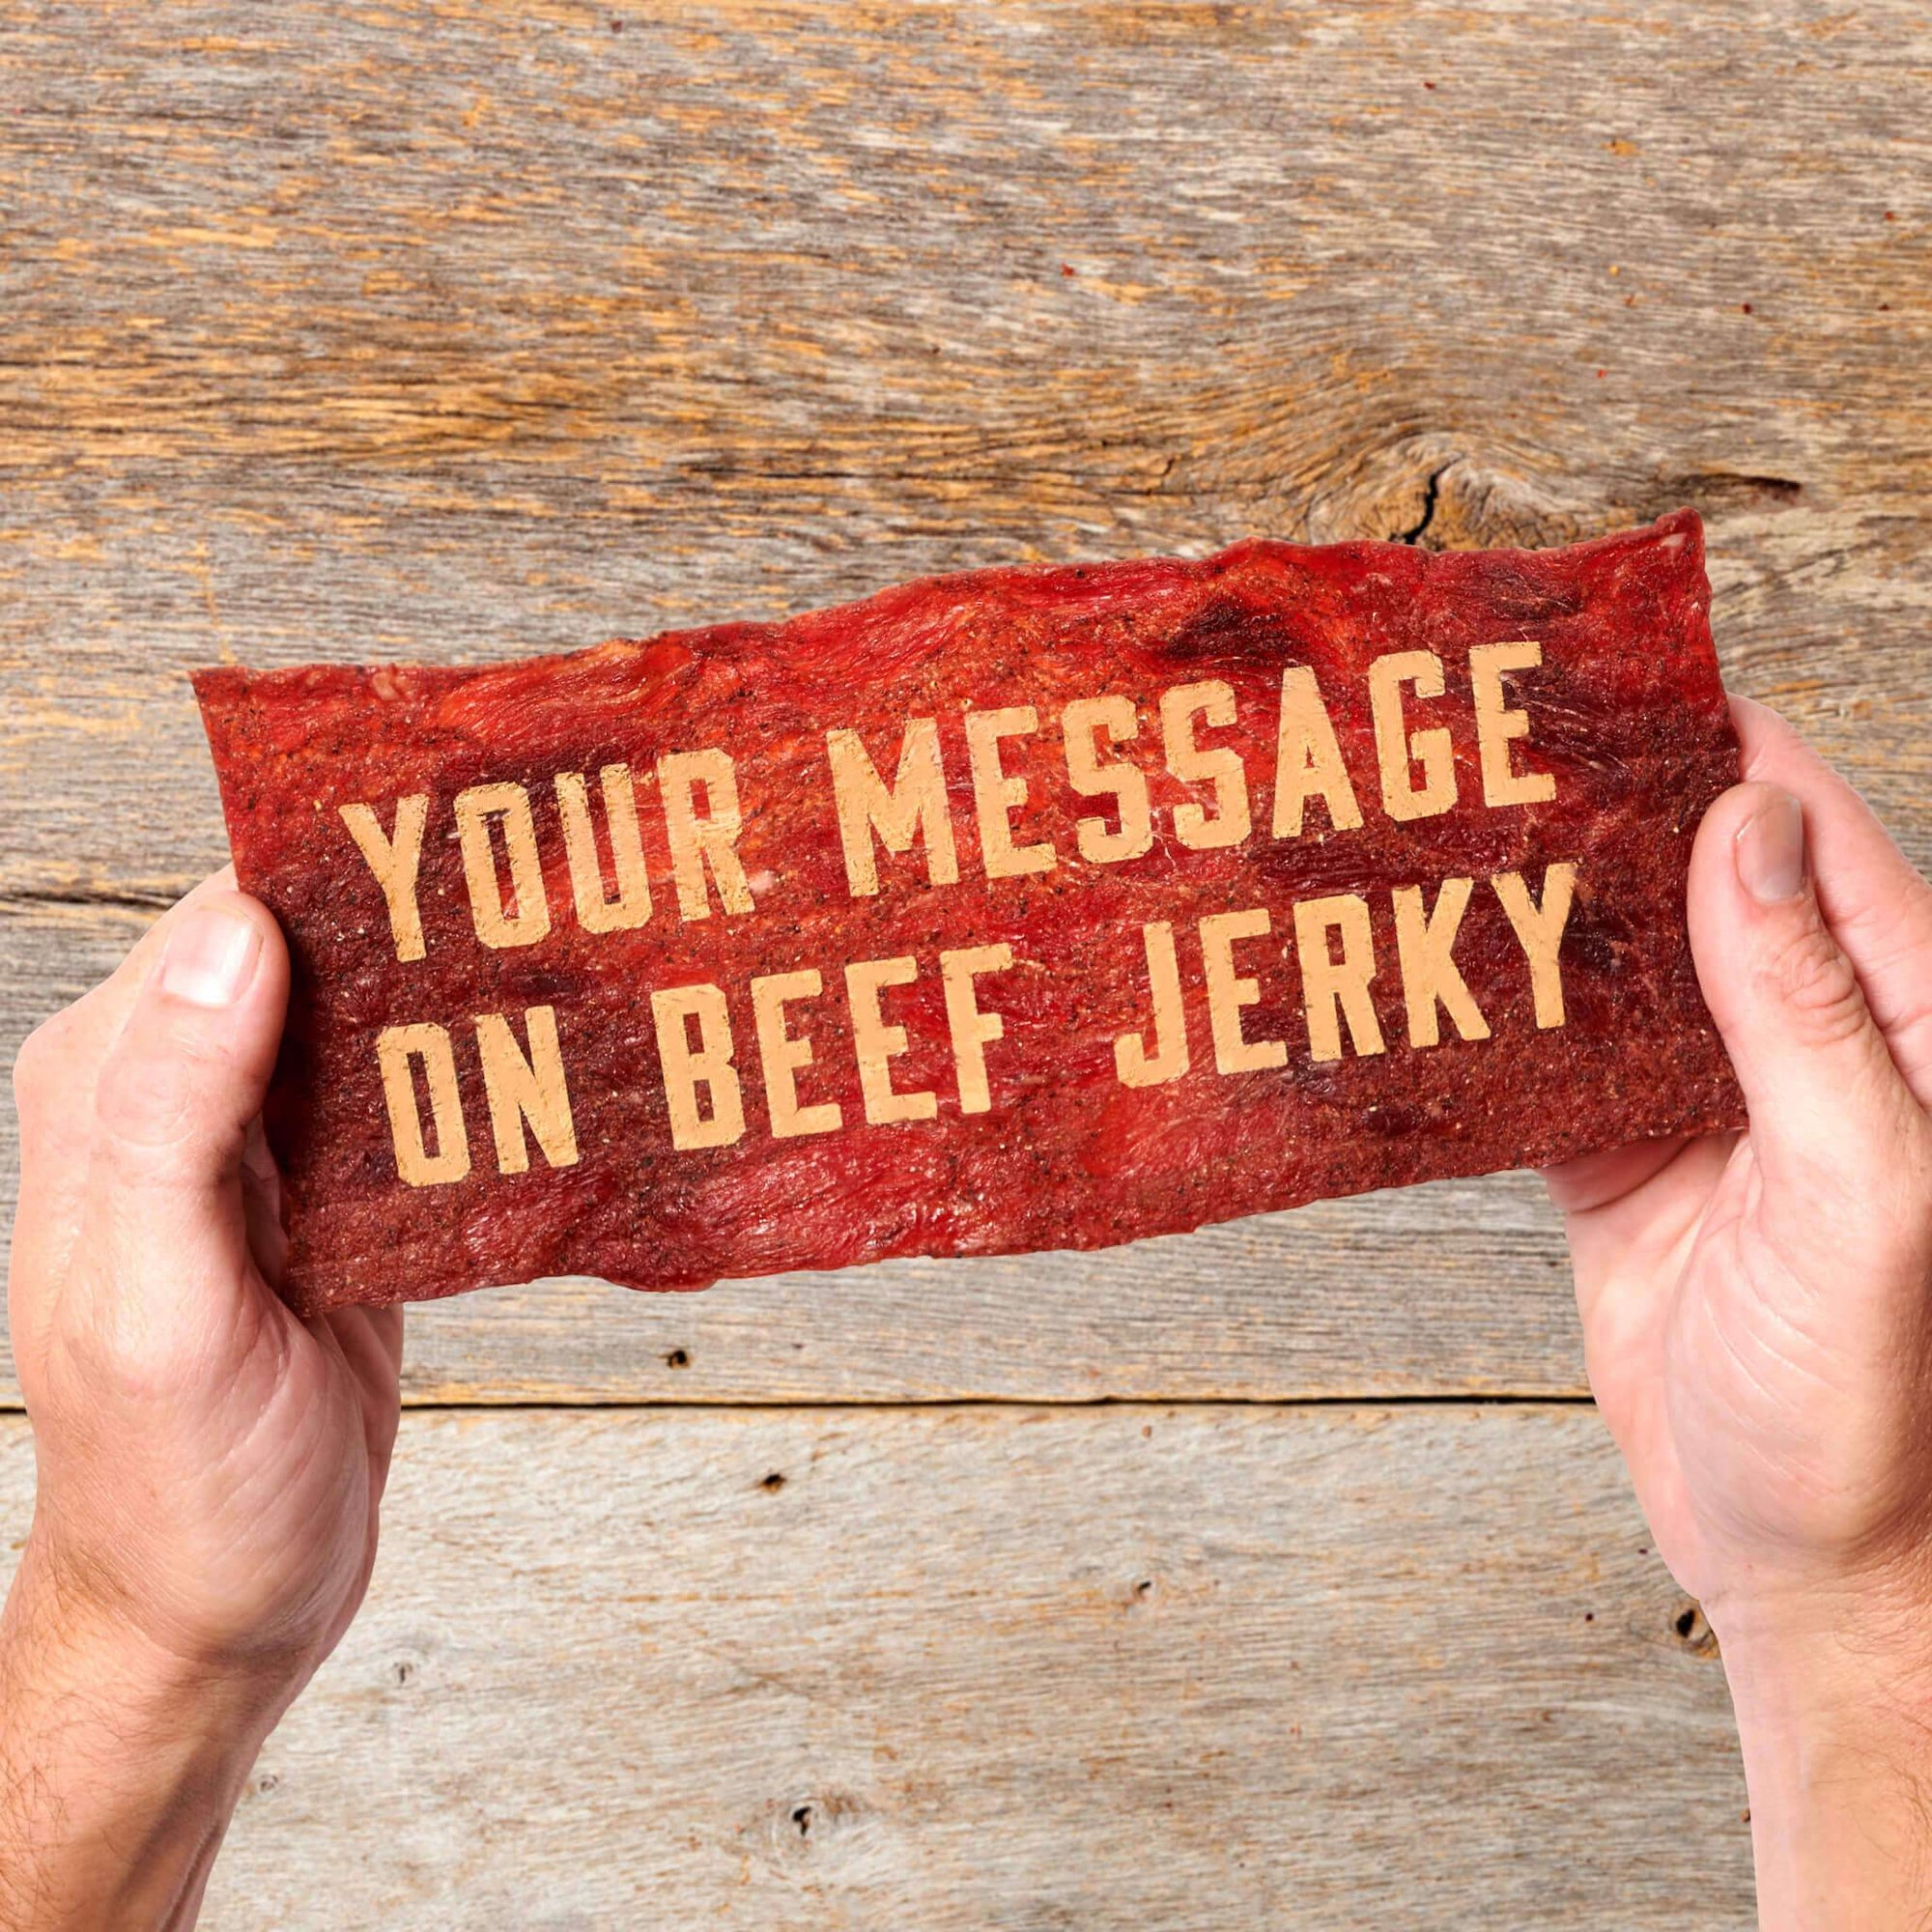 Naughty / dirty message written for a man, laser engraved on beef jerky greeting card